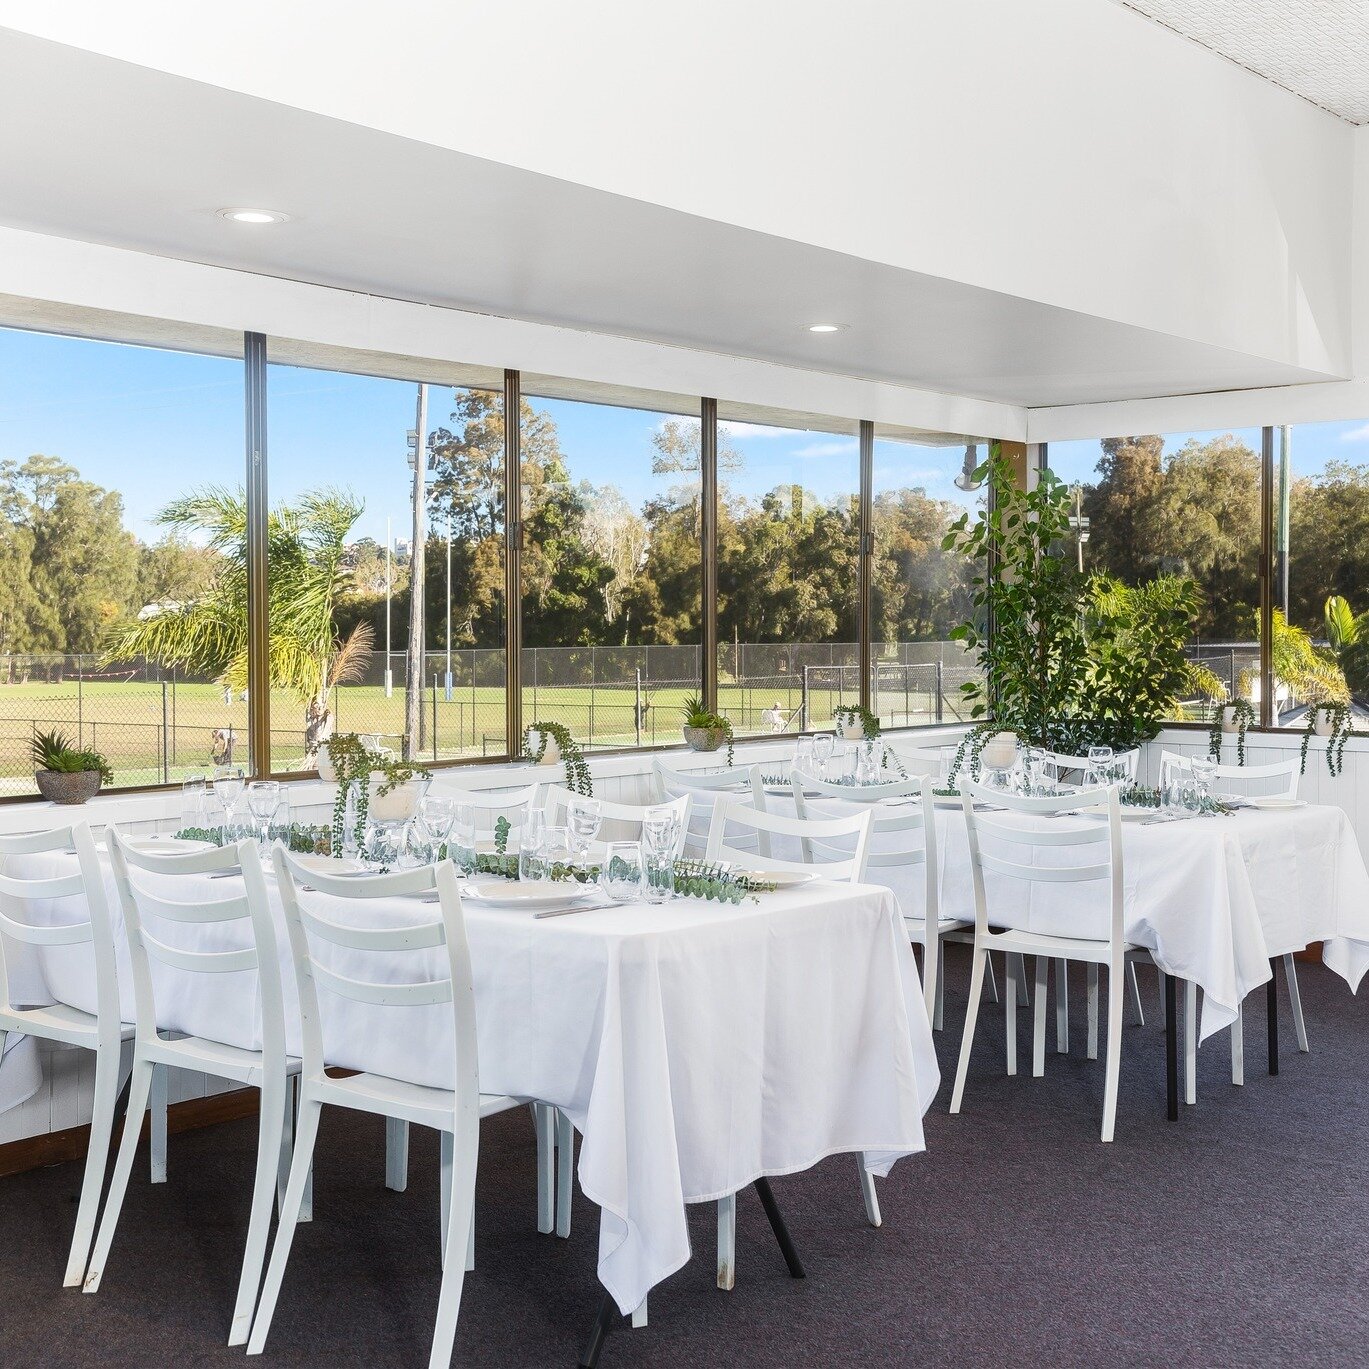 Great View, Food &amp; Service at a Great Price!

Book Greenfields for your next Event!